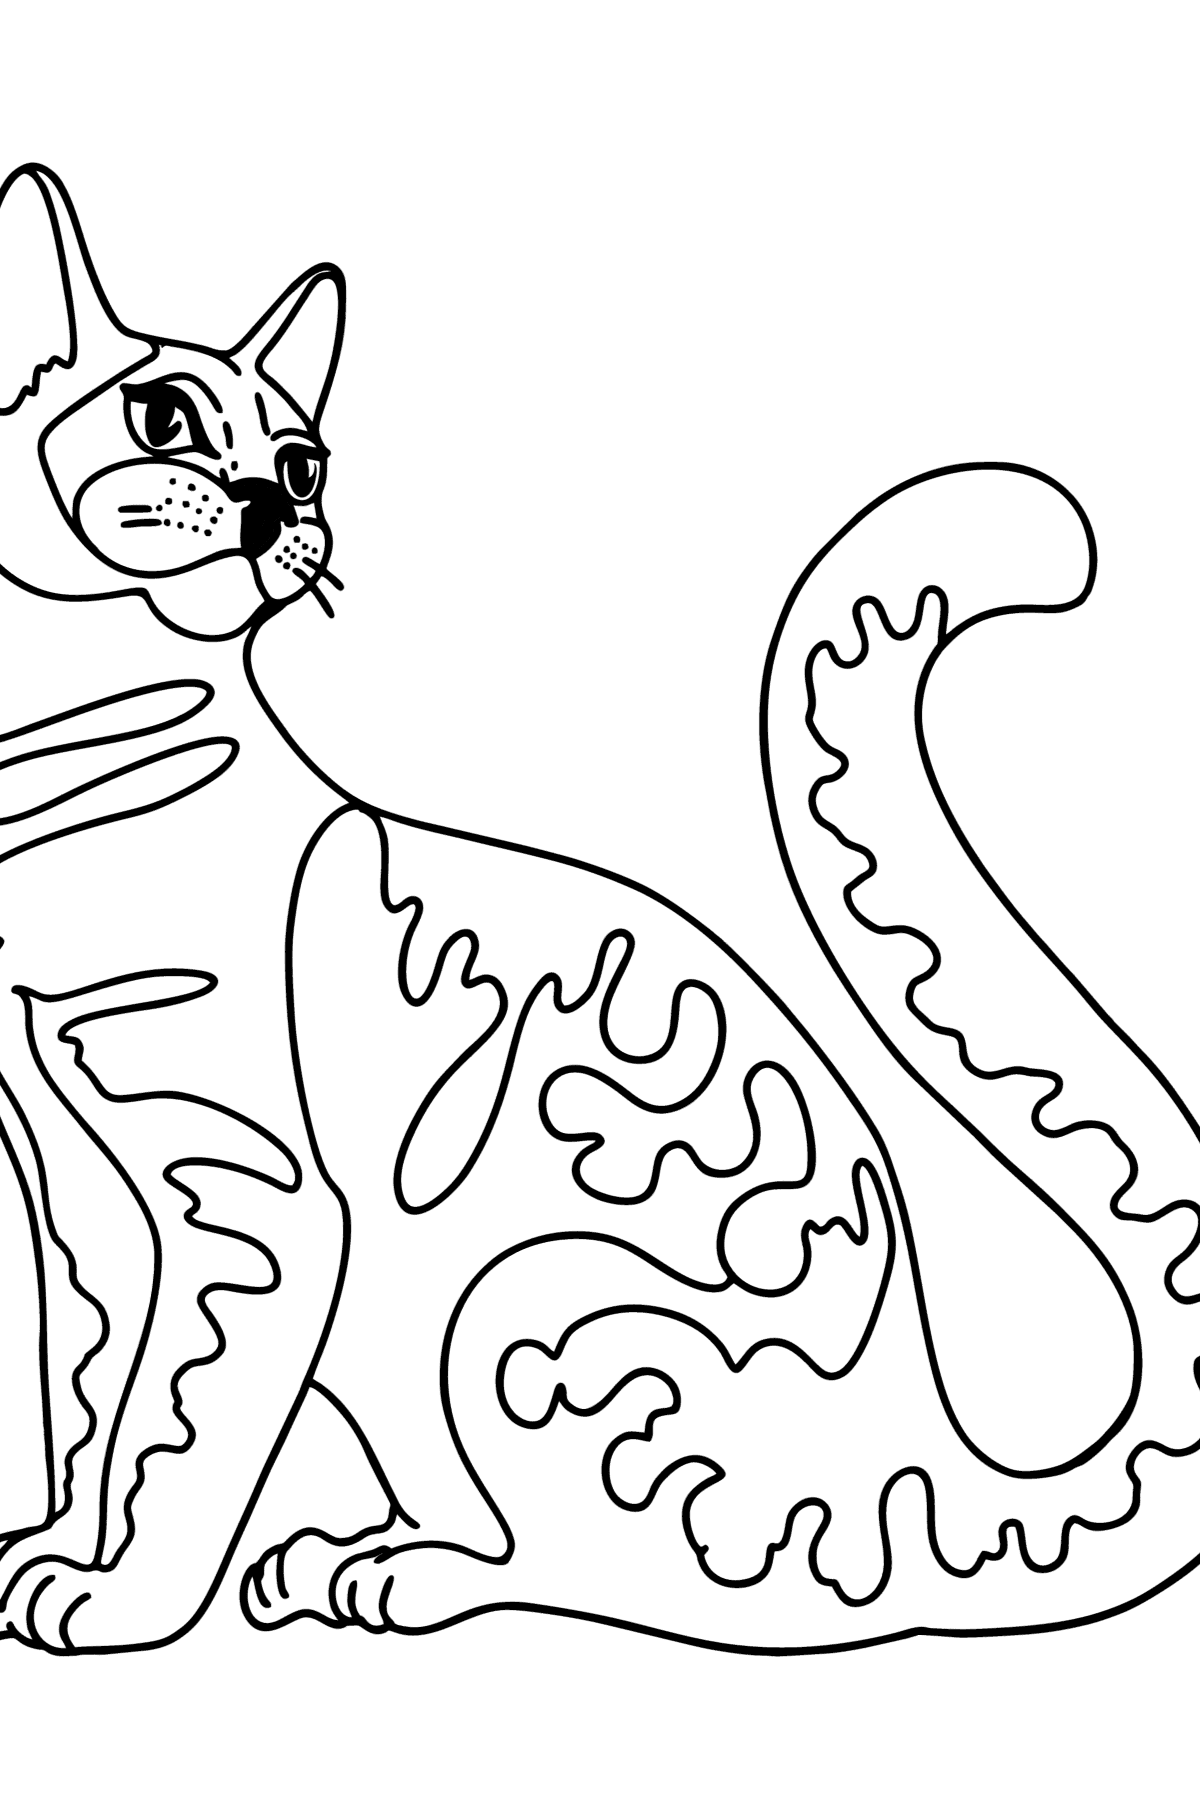 Bengal Cat coloring page - Coloring Pages for Kids